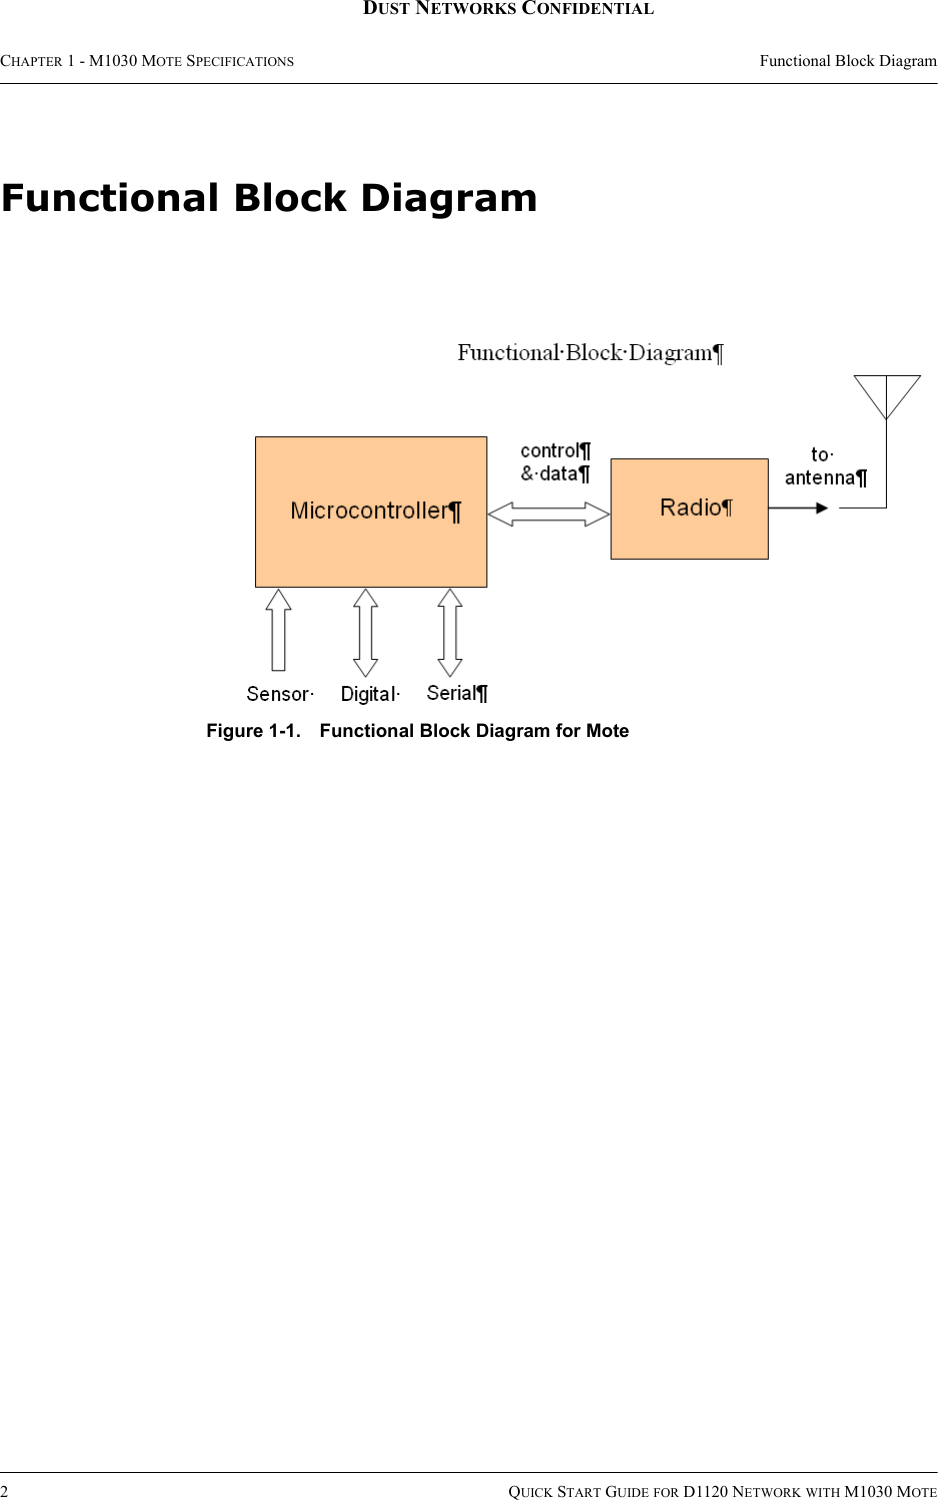 CHAPTER 1 - M1030 MOTE SPECIFICATIONS Functional Block Diagram2QUICK START GUIDE FOR D1120 NETWORK WITH M1030 MOTEDUST NETWORKS CONFIDENTIALFunctional Block DiagramFigure 1-1. Functional Block Diagram for Mote